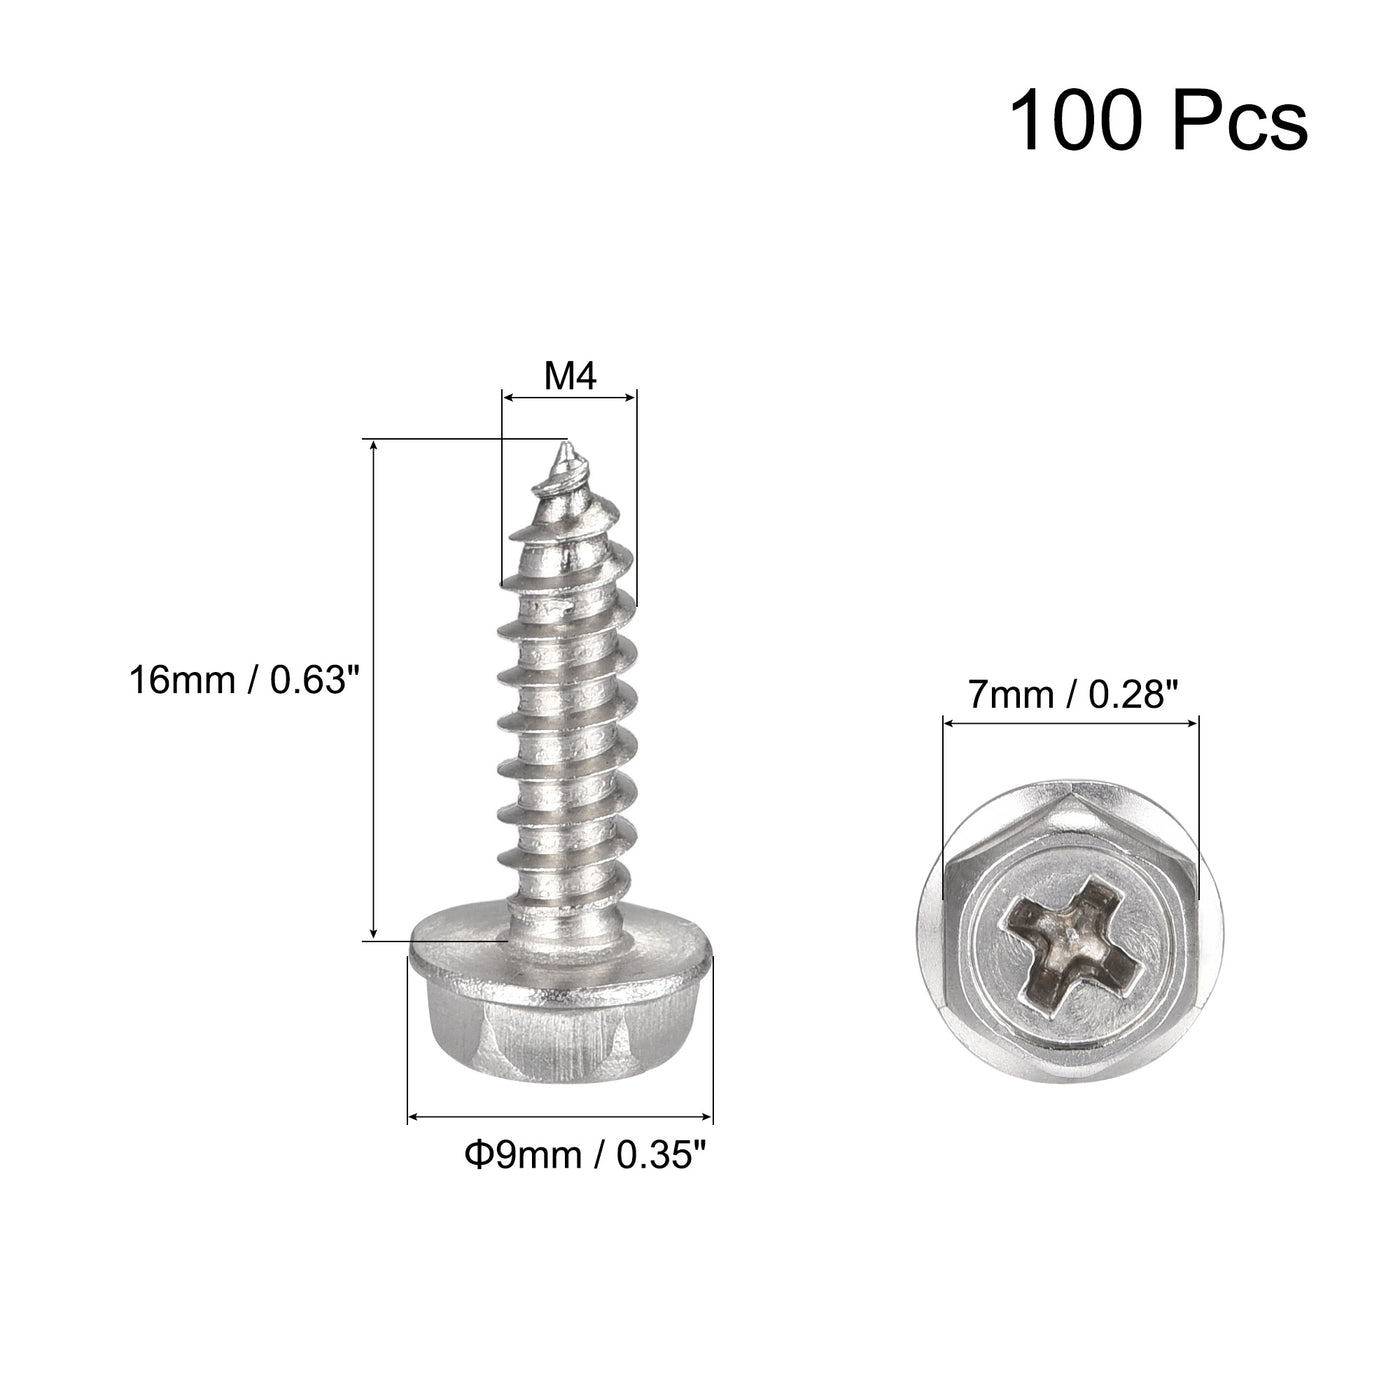 uxcell Uxcell Phillips Hex Washer Self Tapping Screws, M4 x 16mm 304 Stainless Steel Hex Flange Sheet Metal Screw 100pcs